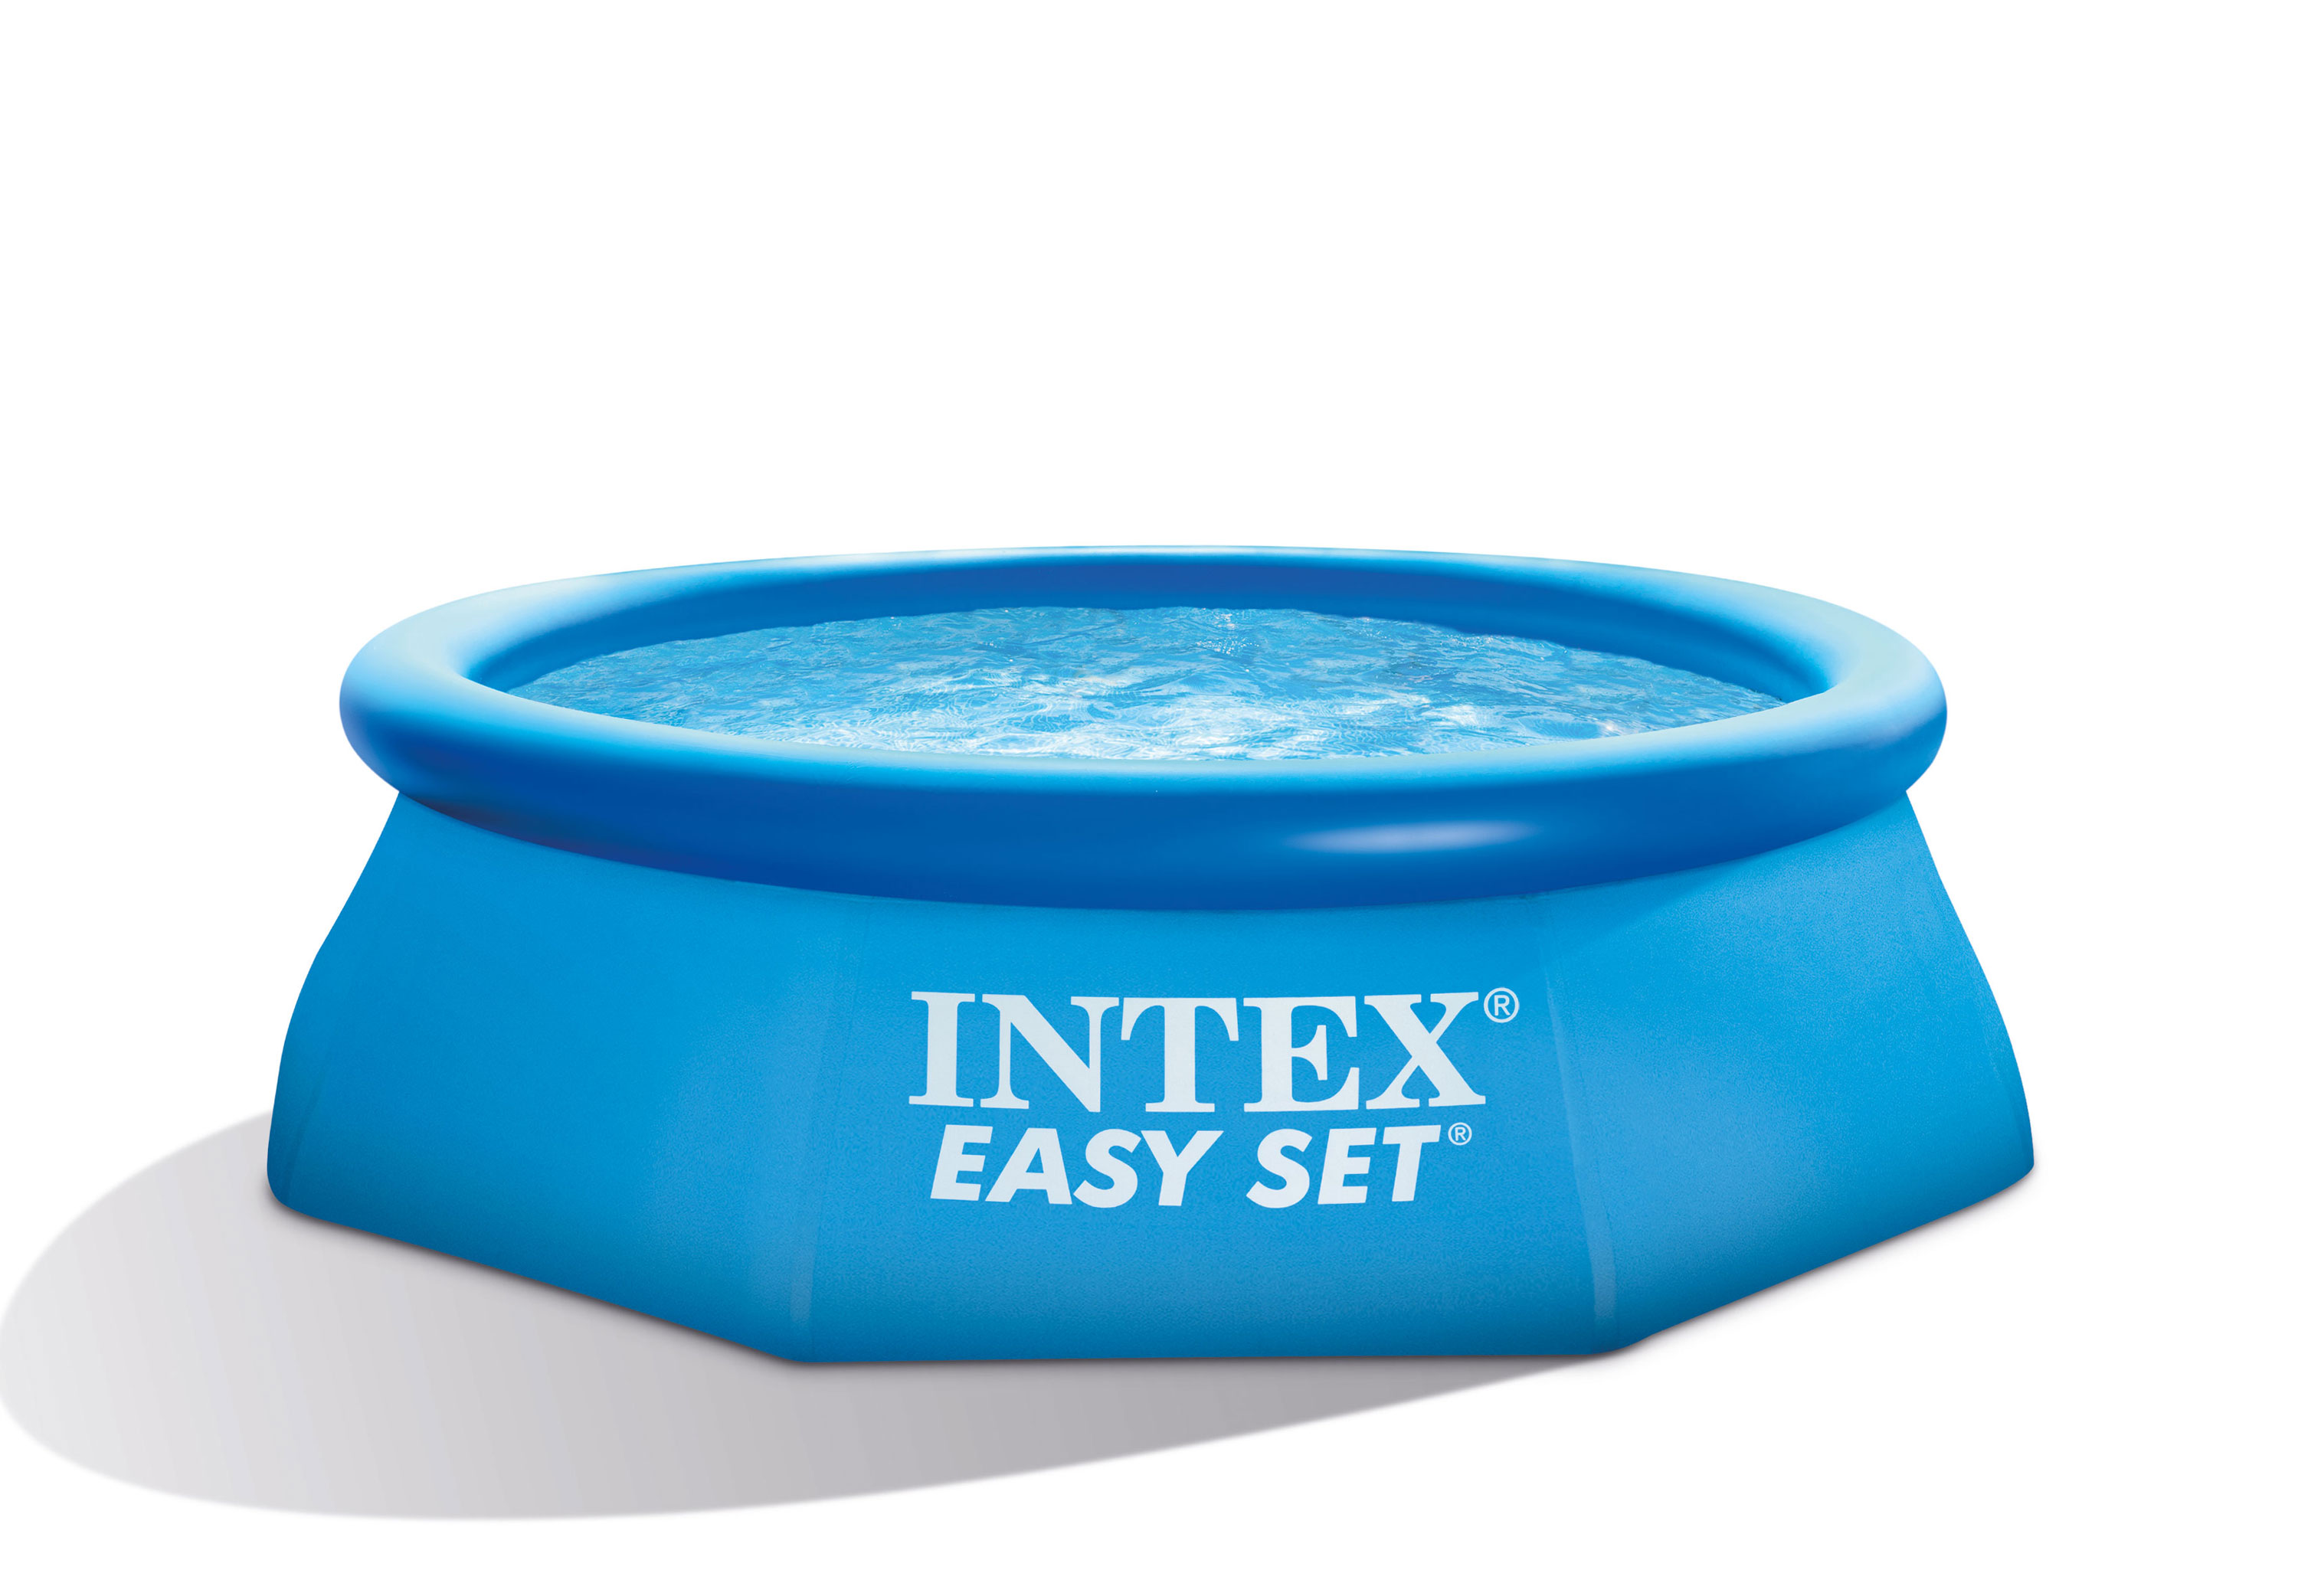 Intex 8ft x 30″ Easy Set Inflatable Above Ground Family Swimming Pool